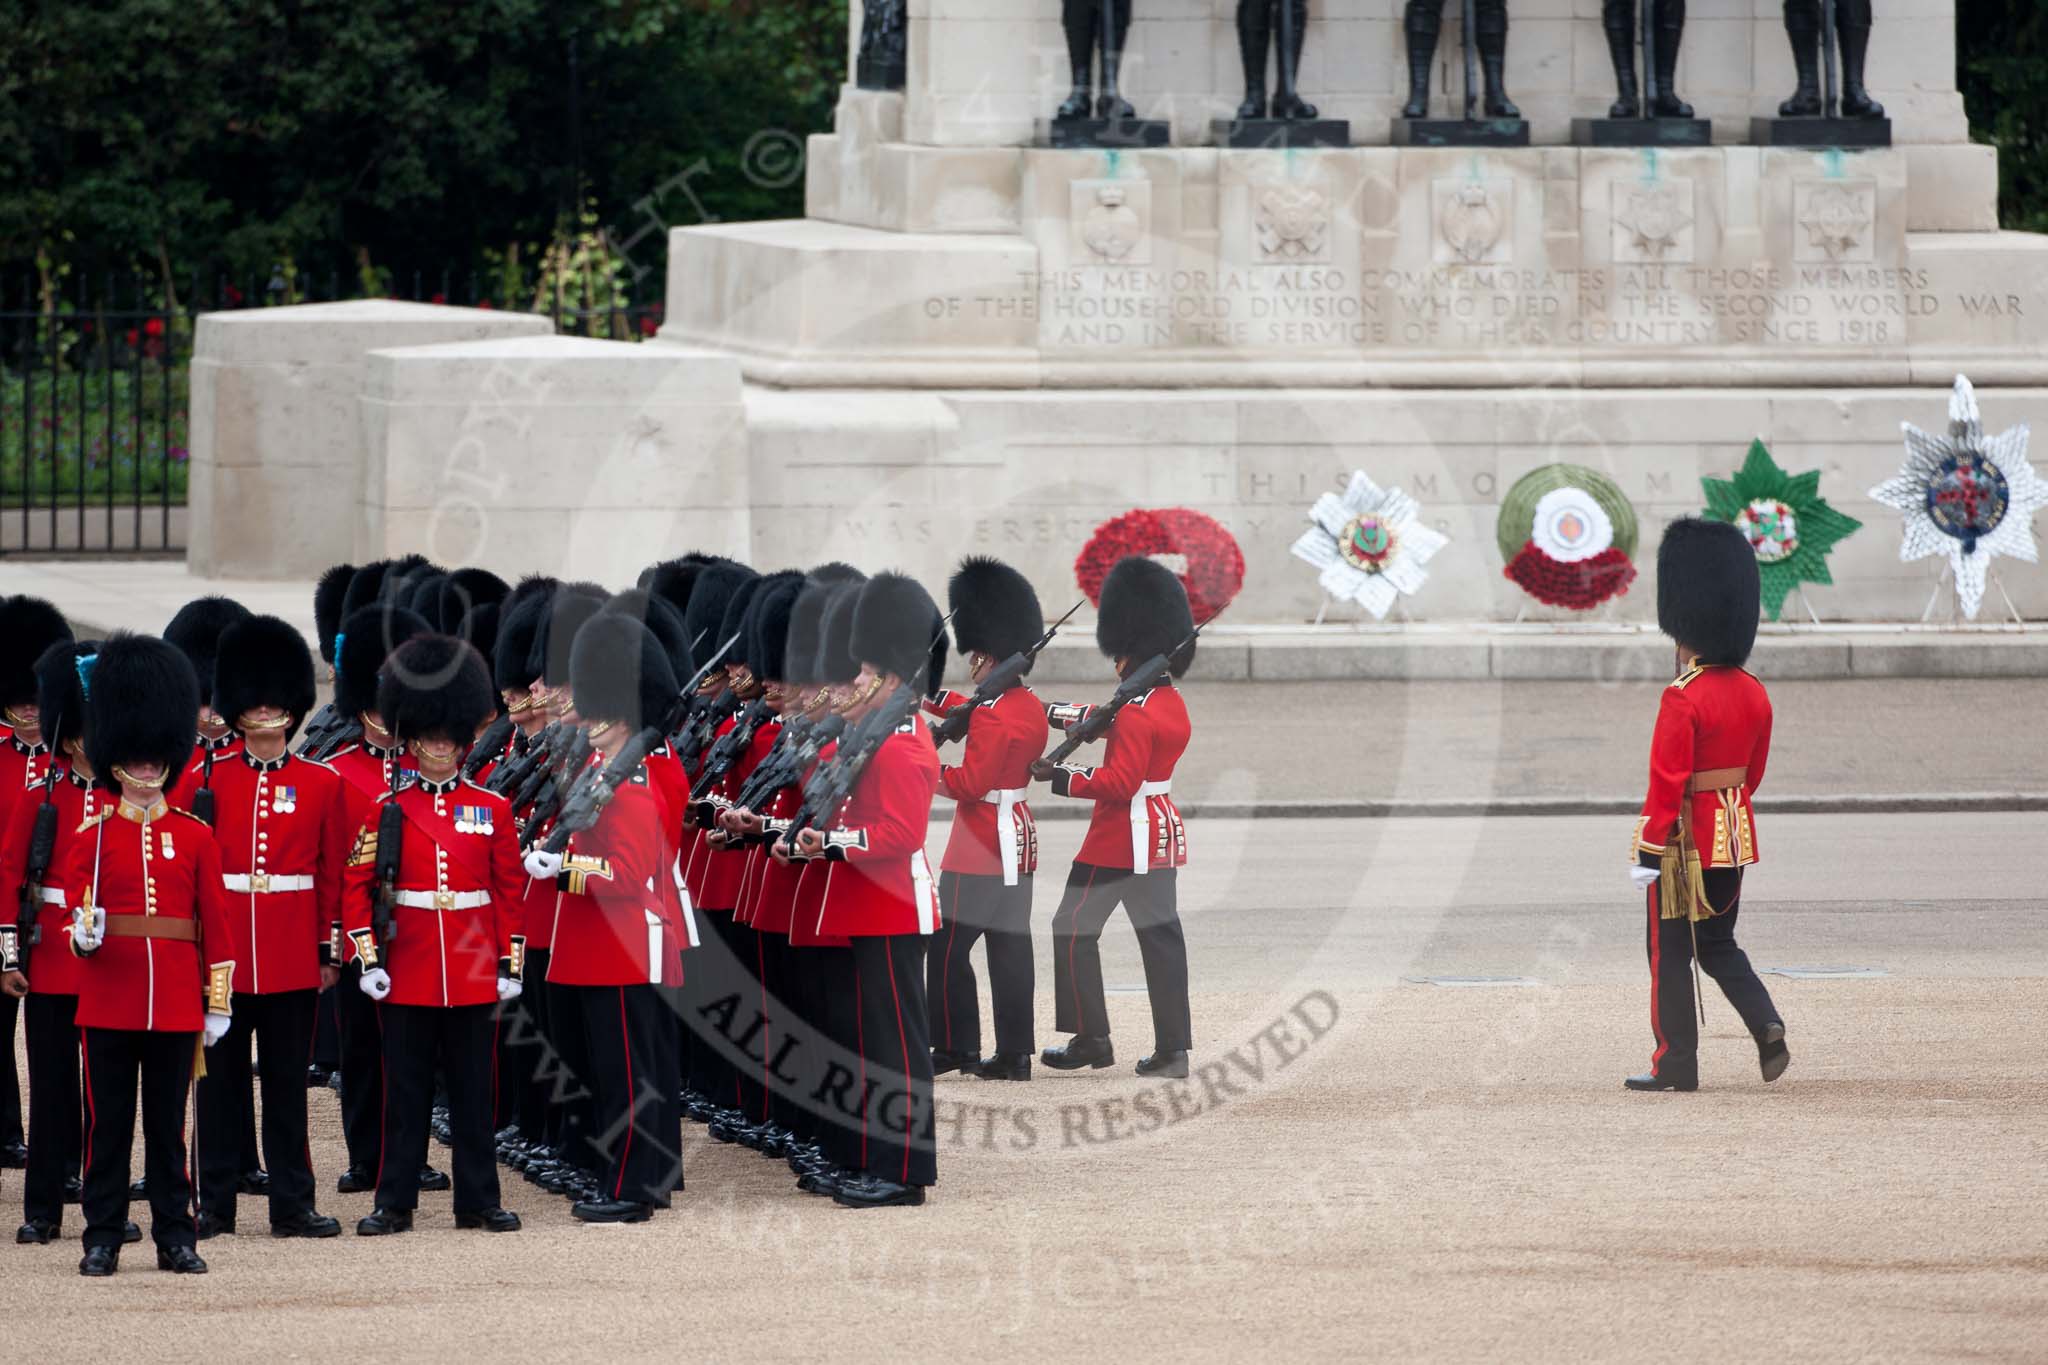 Trooping the Colour 2009: No. 3 Guard, 1st Battalion Irish Guards, changing position for the arrival of the Royal Procession. Behind them the Guards Memorial..
Horse Guards Parade, Westminster,
London SW1,

United Kingdom,
on 13 June 2009 at 10:43, image #82